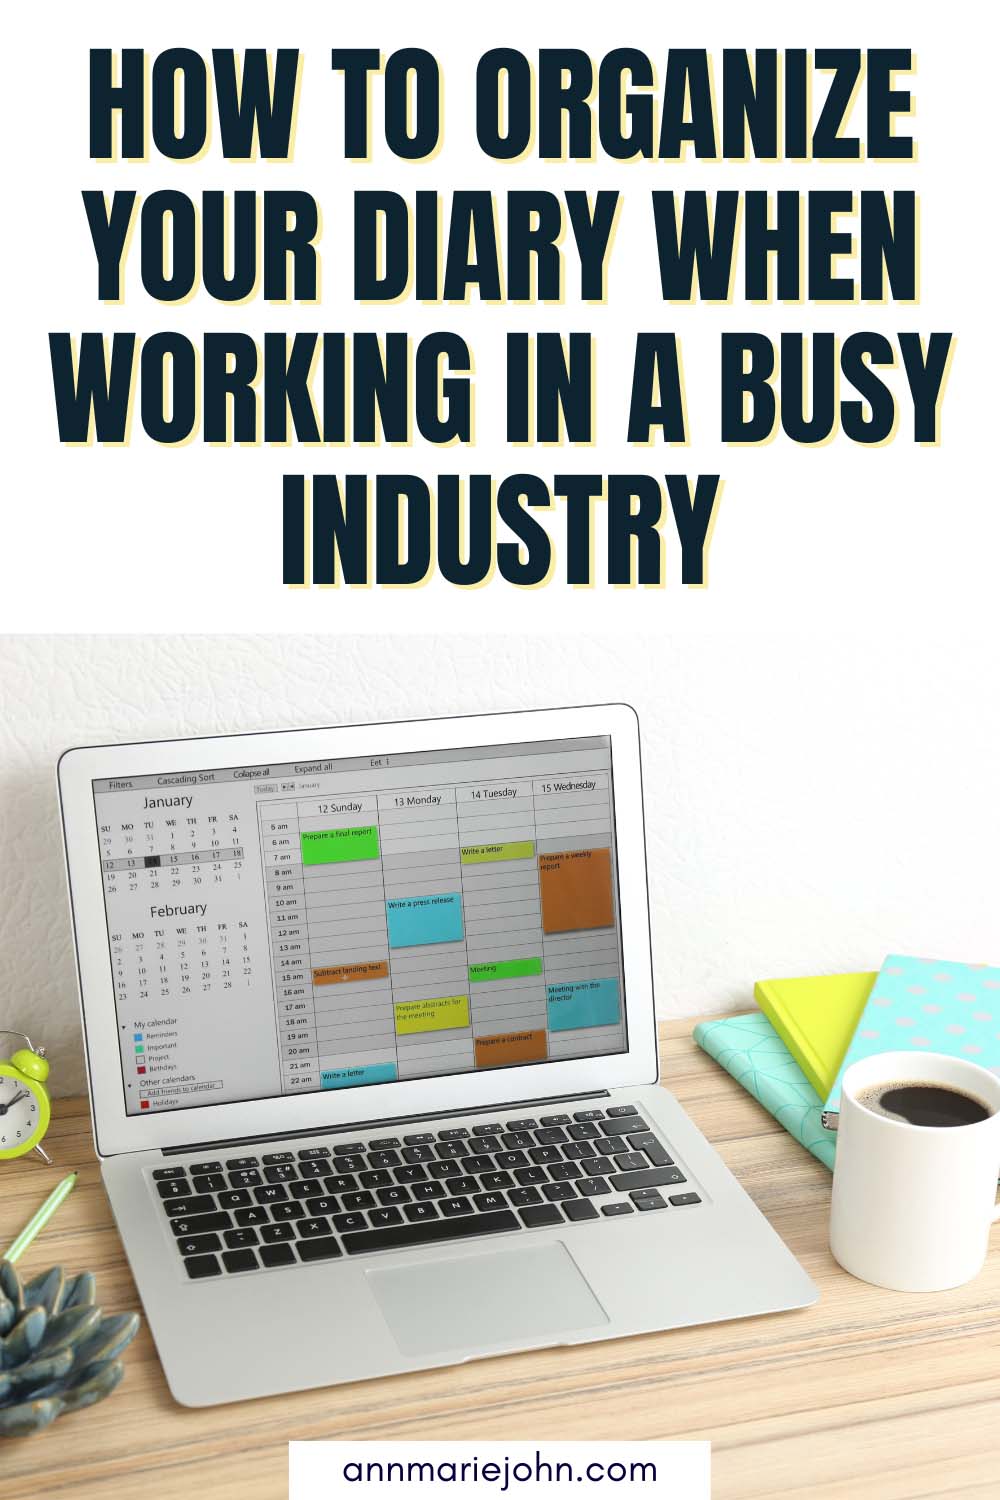 How to Organize Your Diary When Working in a Busy Industry